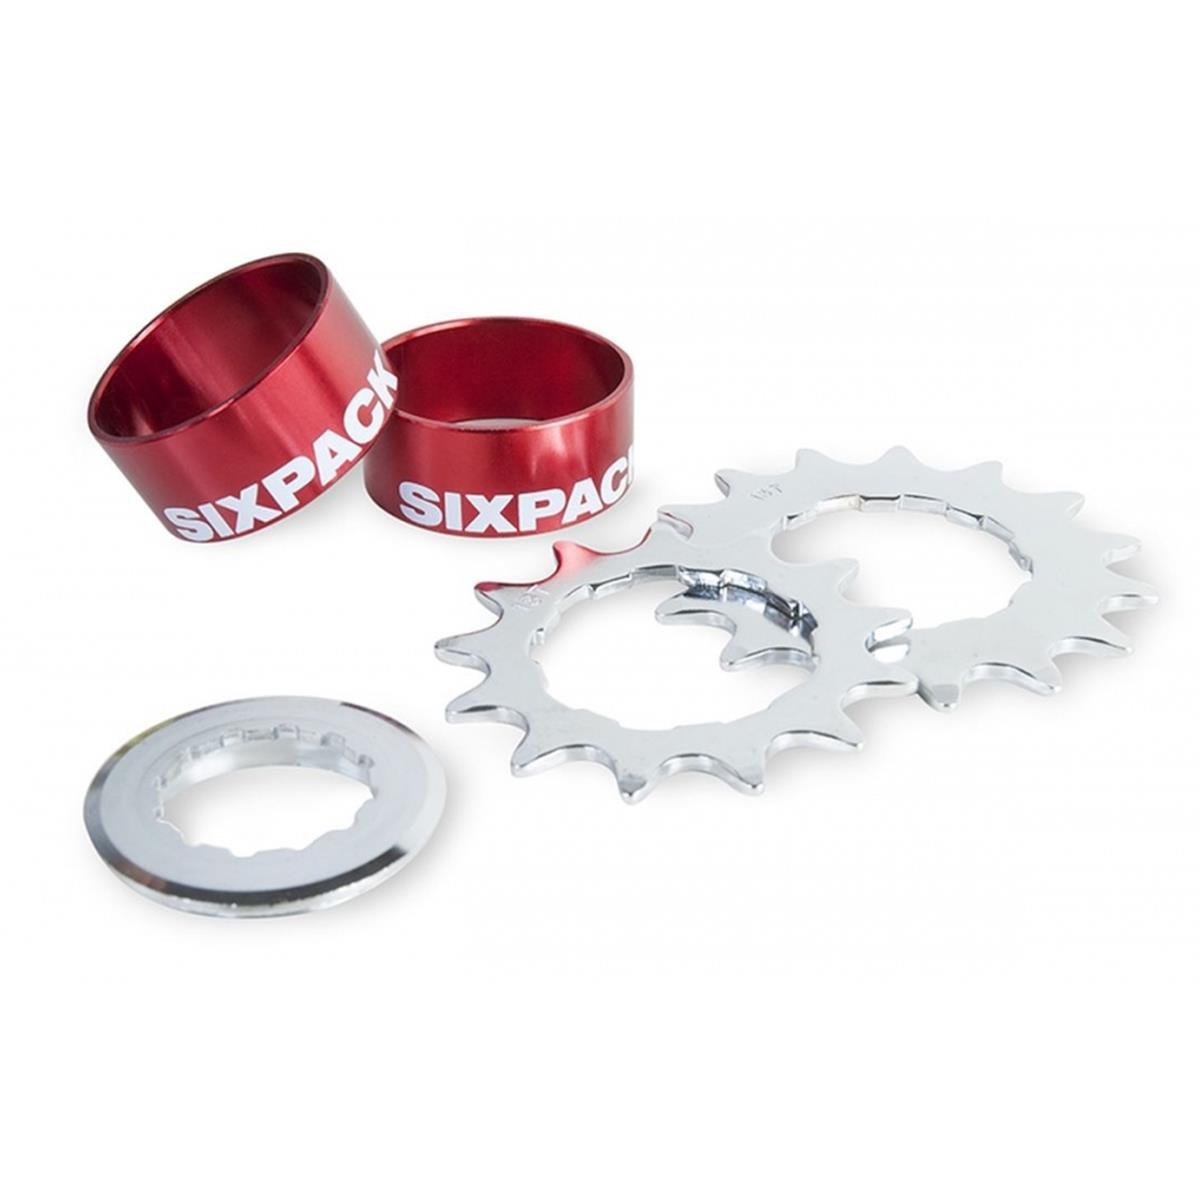 Sixpack Kit conversione Single Speed  Rosso, incl. 2 Chainrings (13 & 15T), fits 8/9710-V Shimano/Sram FreeRuotas